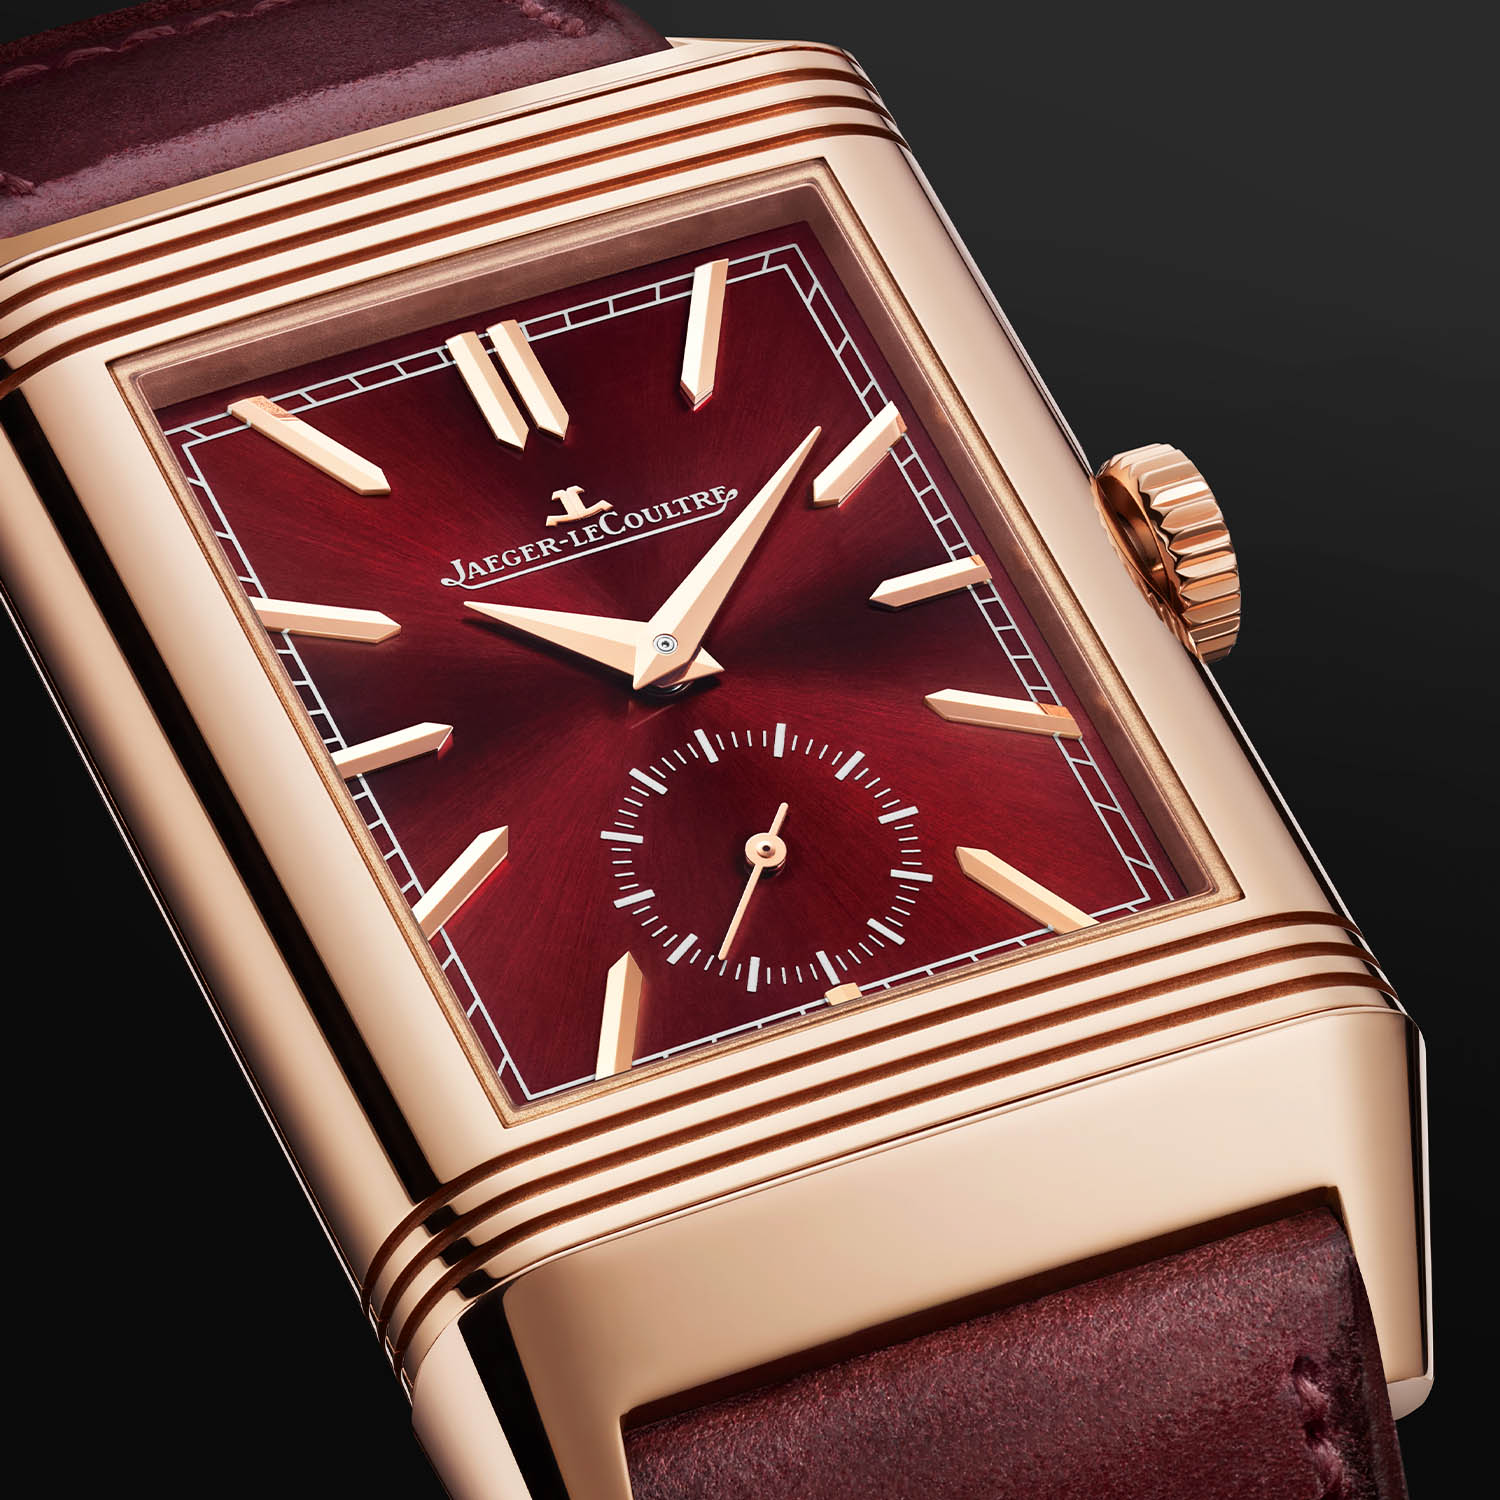 Jaeger LeCoultre Reverso Tribute DuoFace Fagliano Burgundy Limited Q398256J